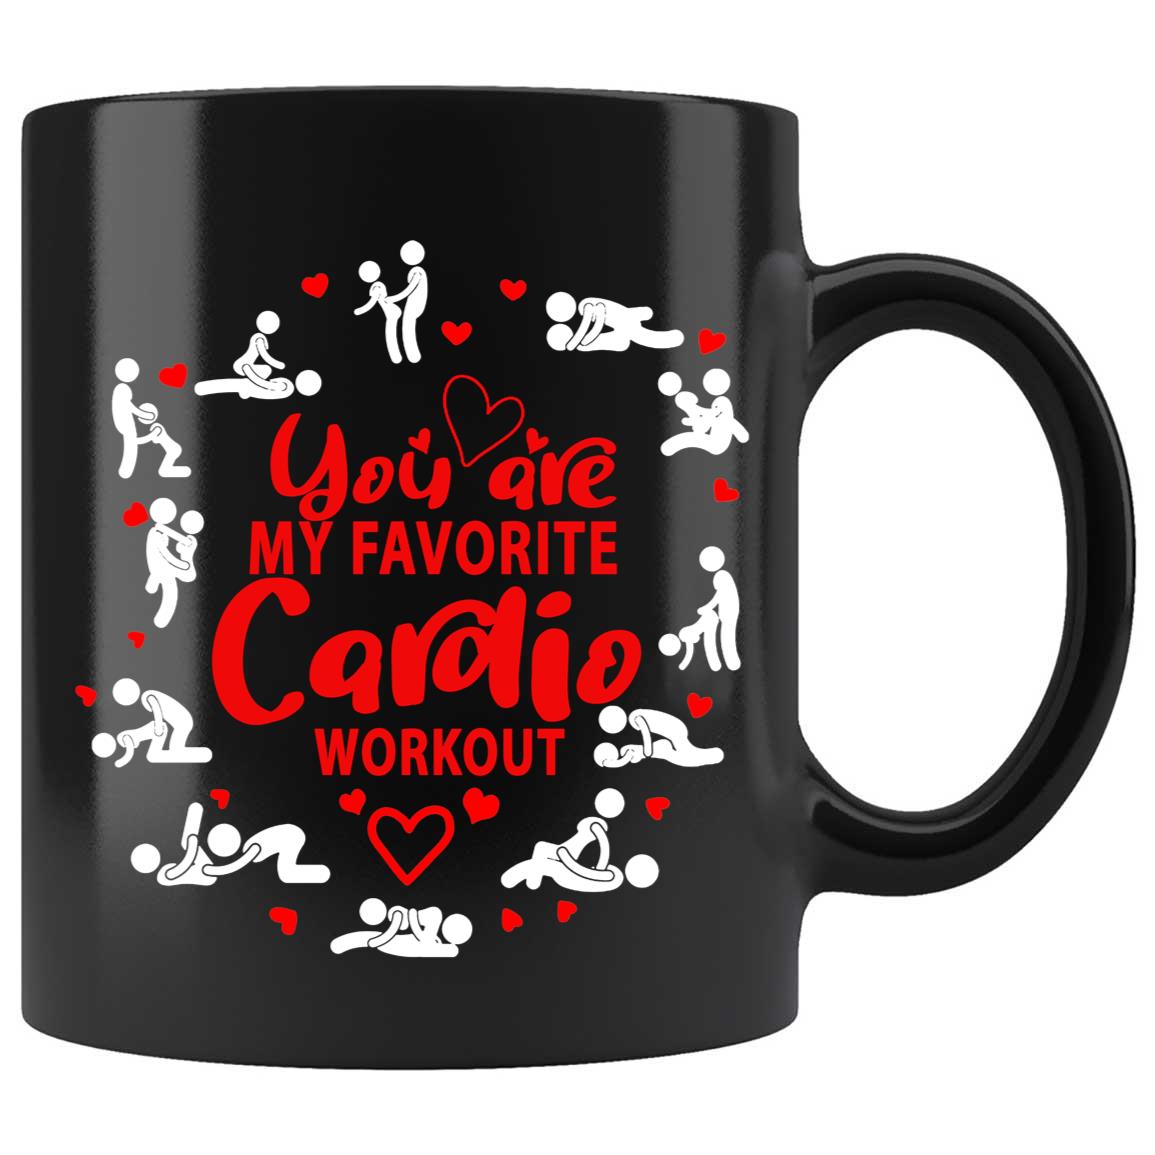 Skitongifts Coffee Mug Funny Ceramic Novelty You're My Favorite Cardio Workout YWUvNqa